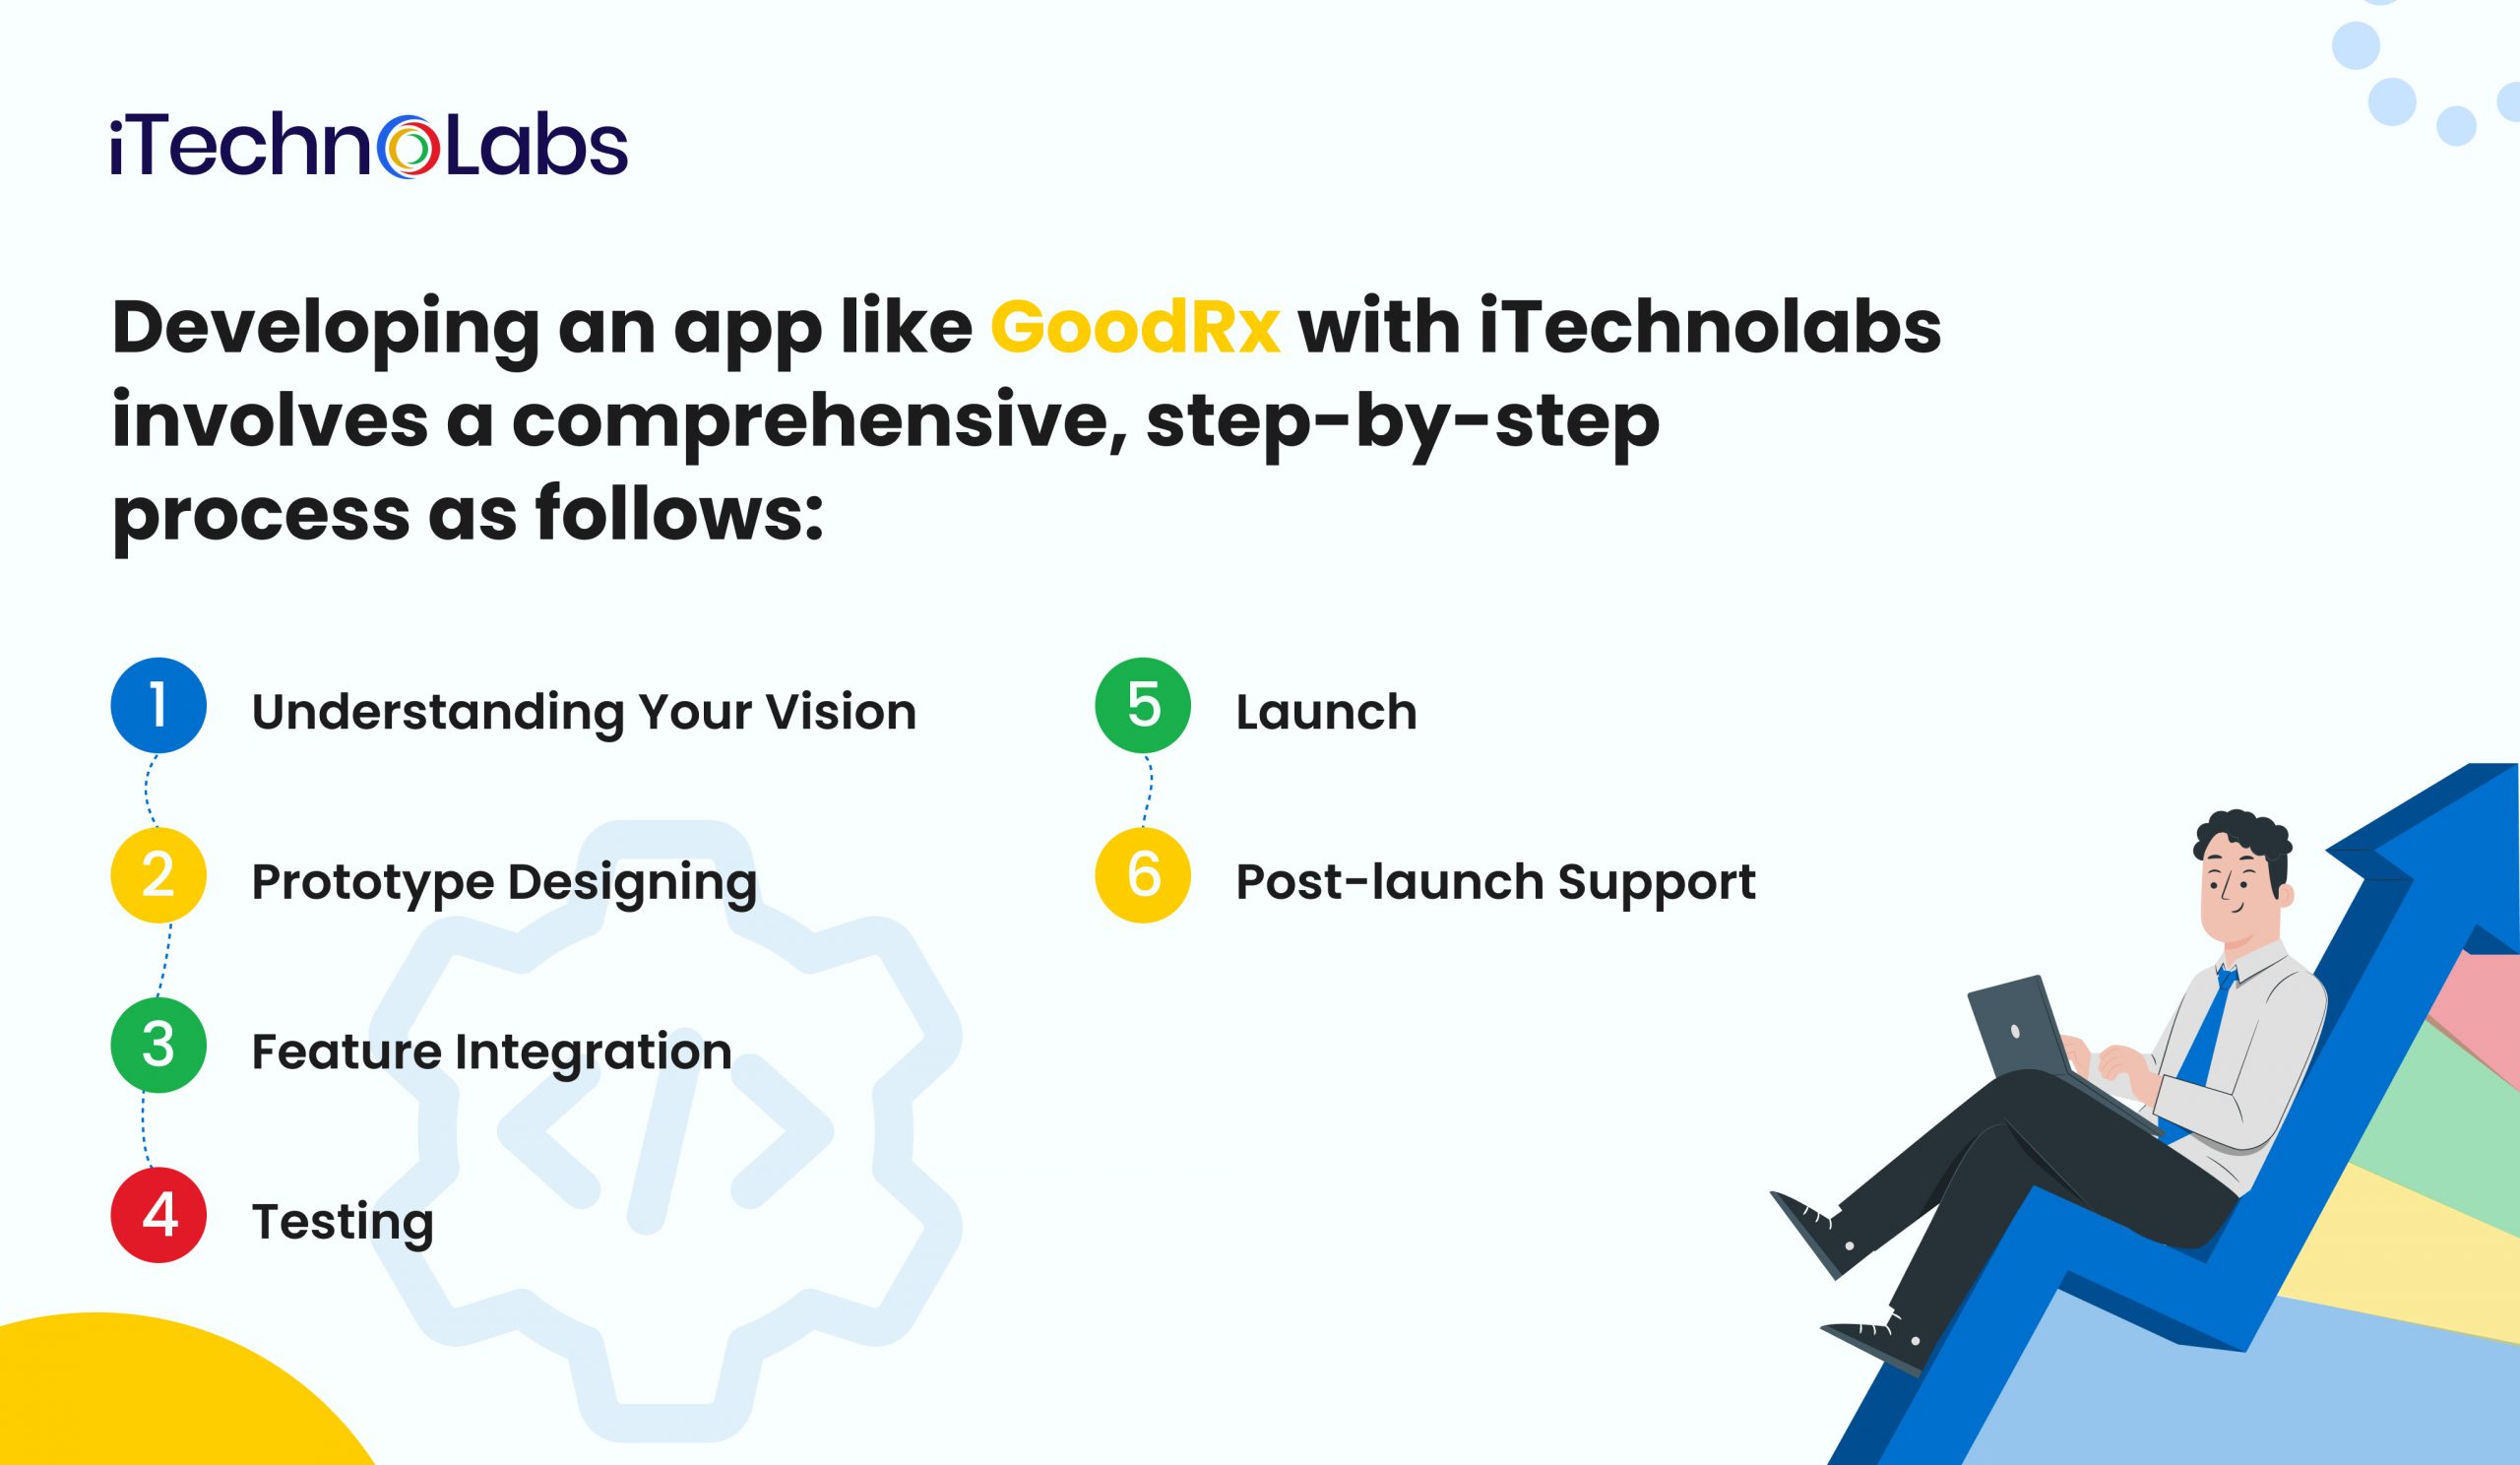 iTechnolabs-Developing an app like GoodRx with iTechnolabs involves a comprehensive, step-by-step process as follows